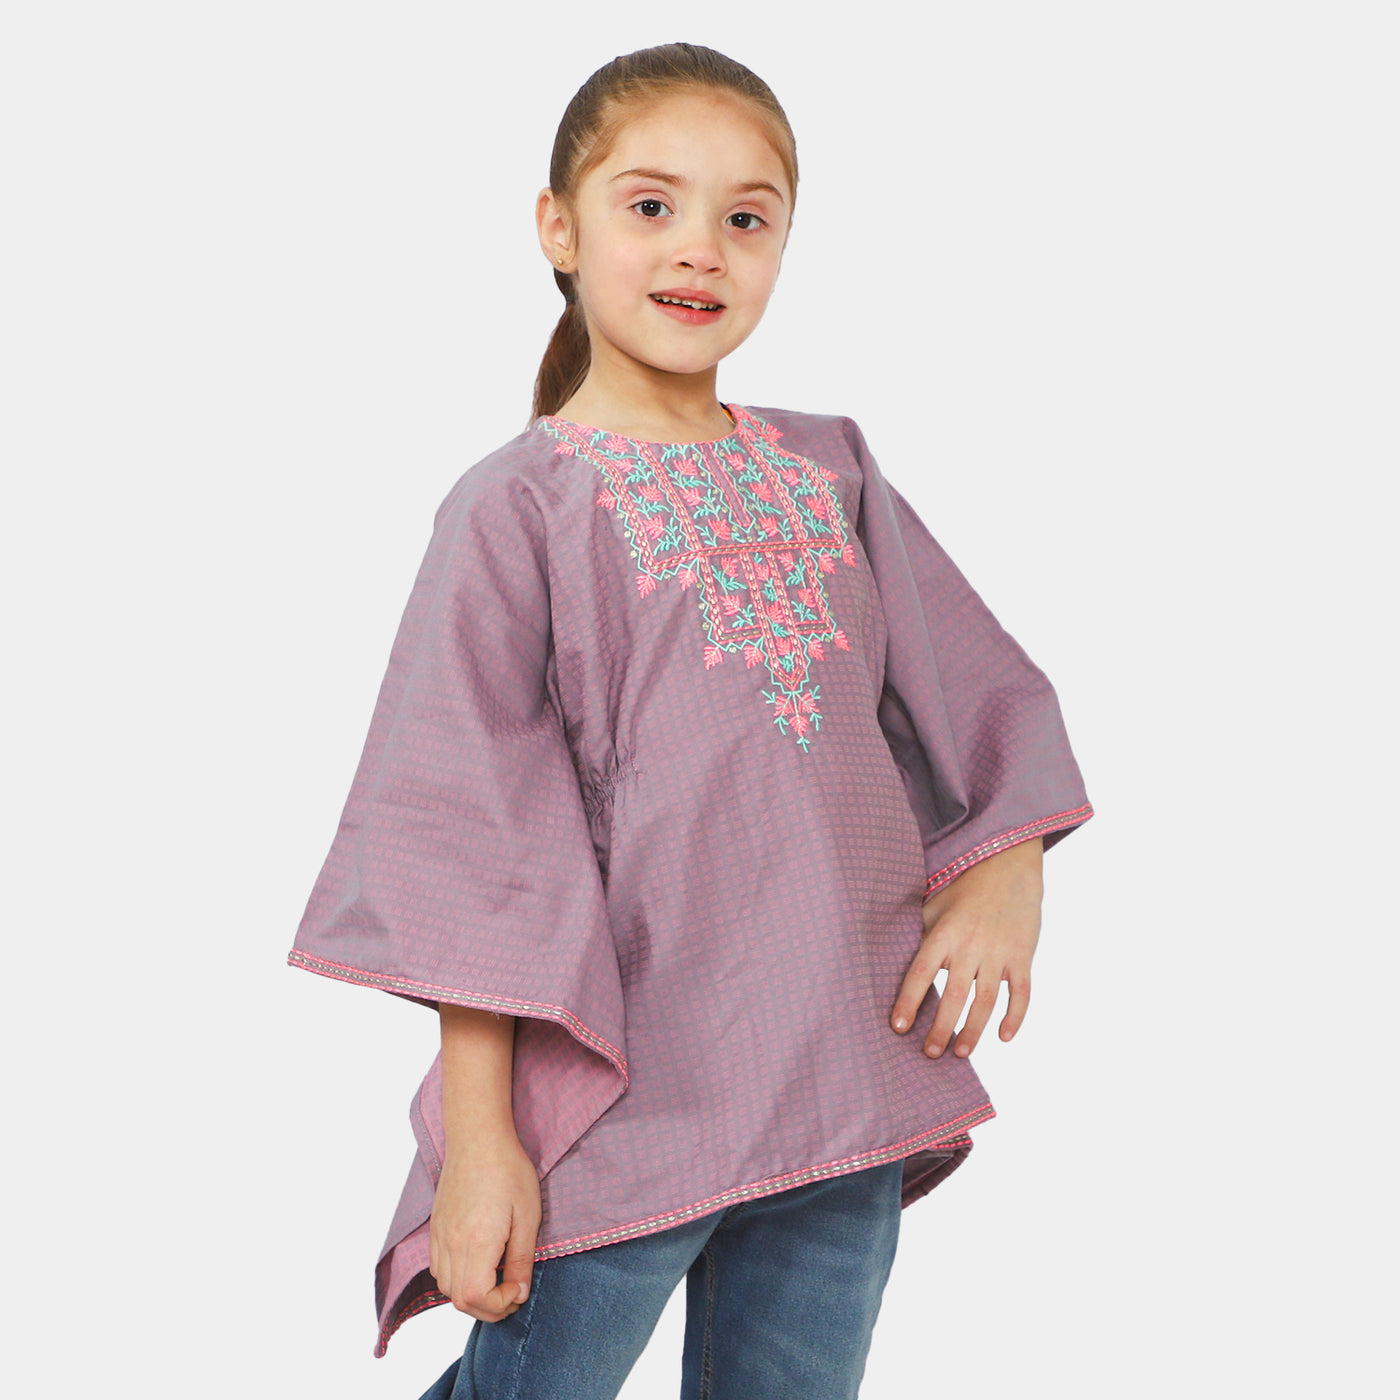 Girls Cotton Embroidered Top - Lilac